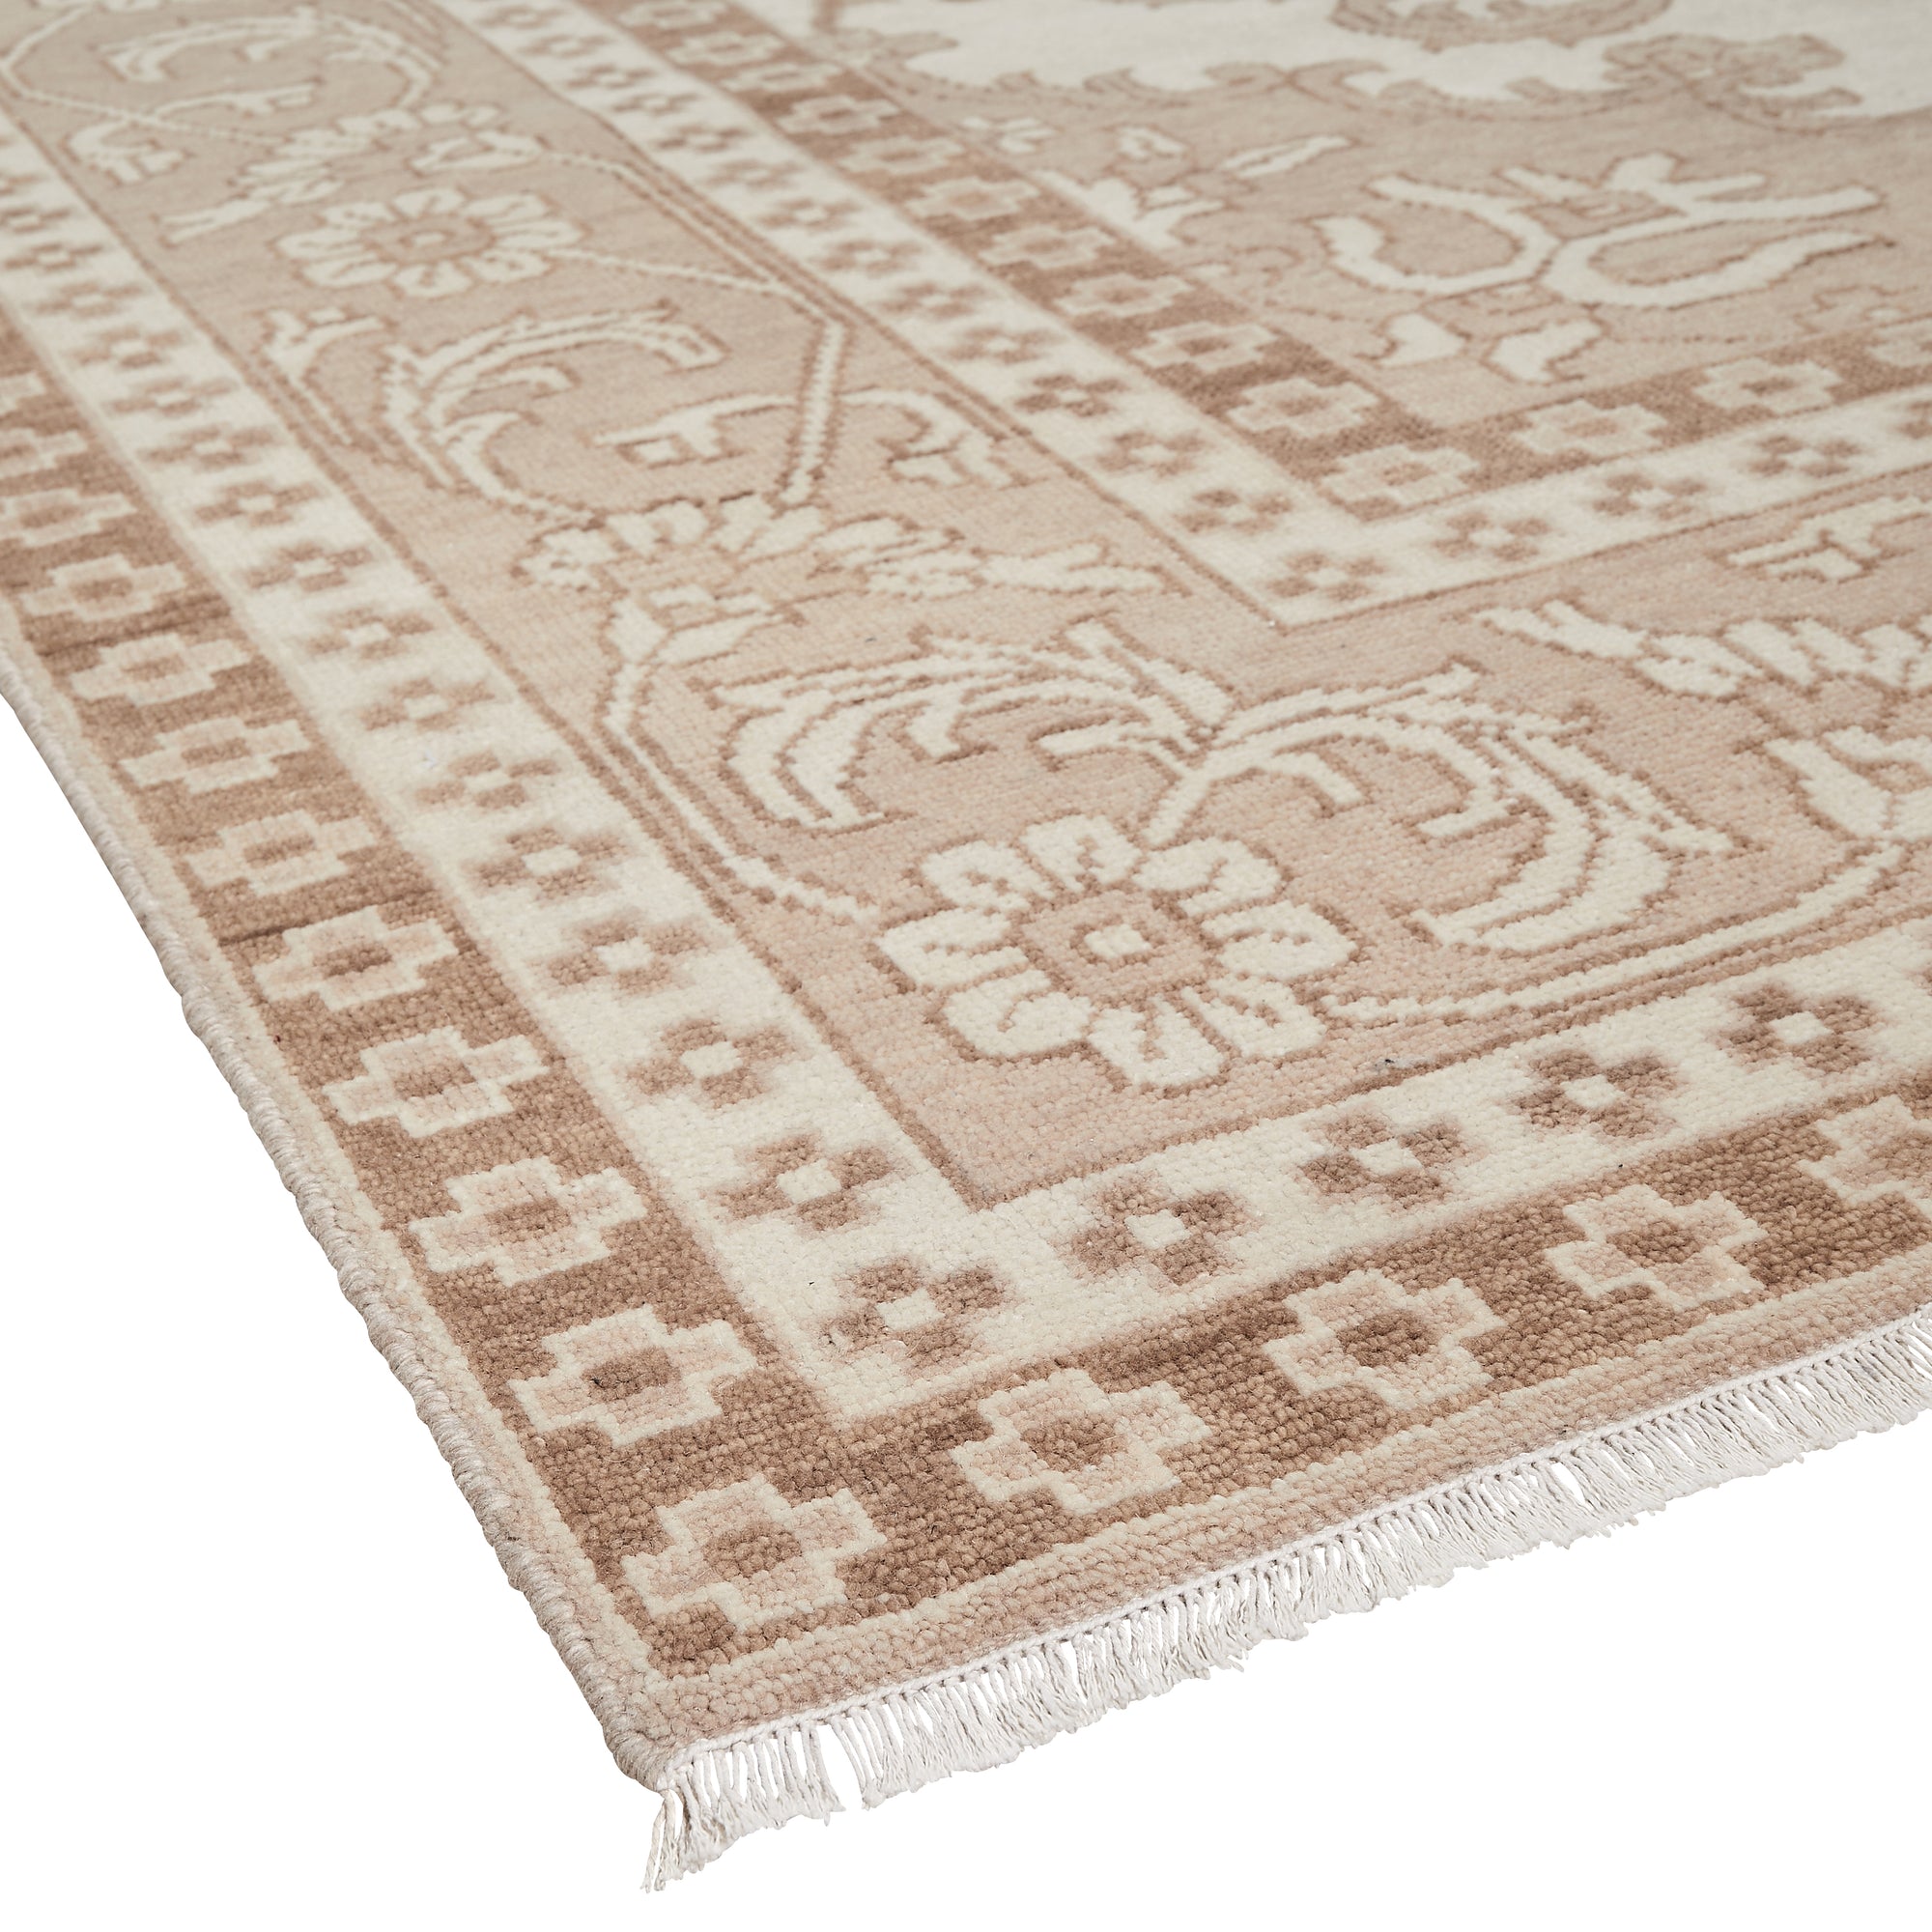 Detail of Simone Area Rug in Caramel with Fringe